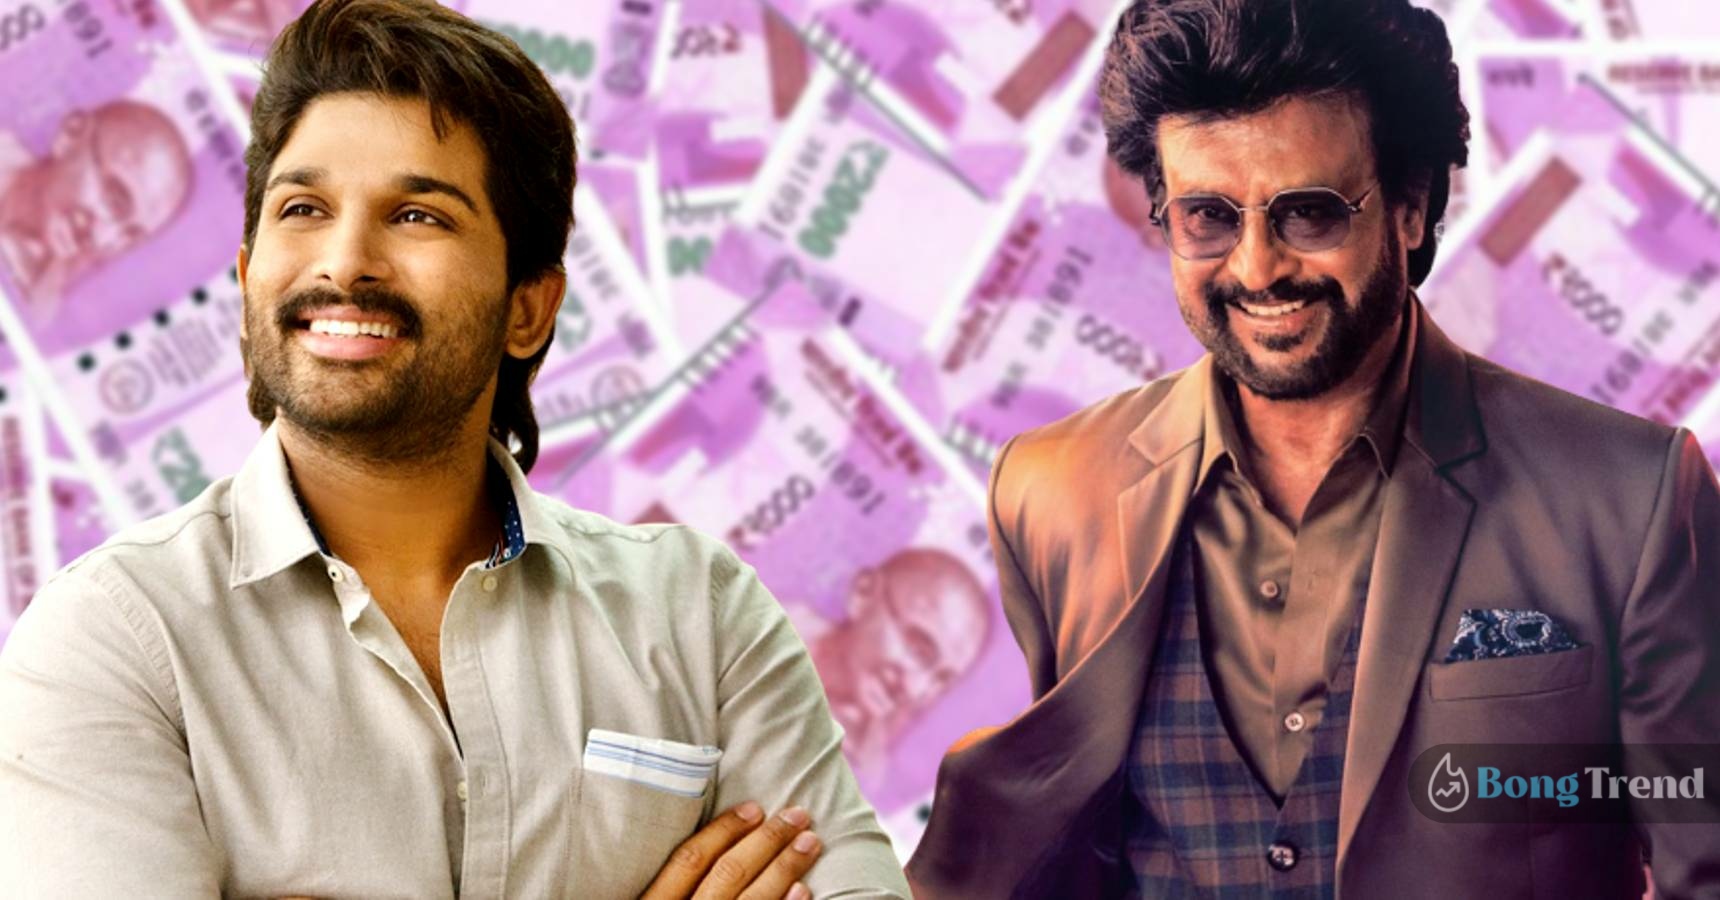 Take a look at the net worth of famous south Indian superstars